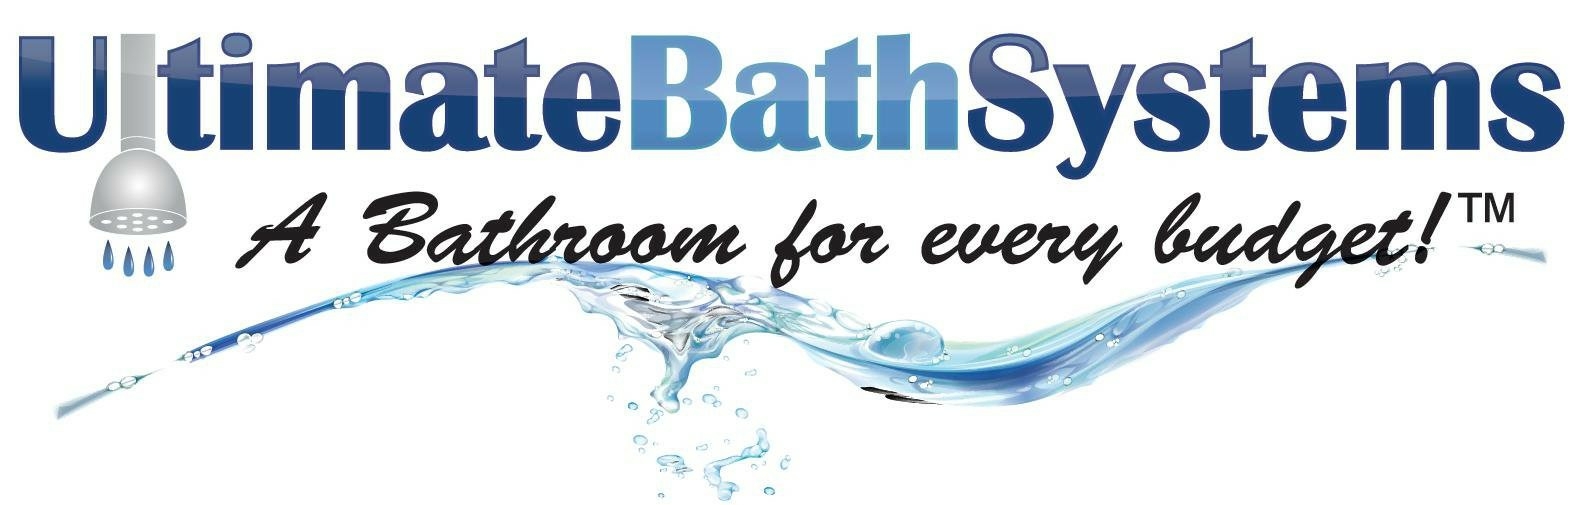 Bathroom Renovations by Ultimate Bath Systems